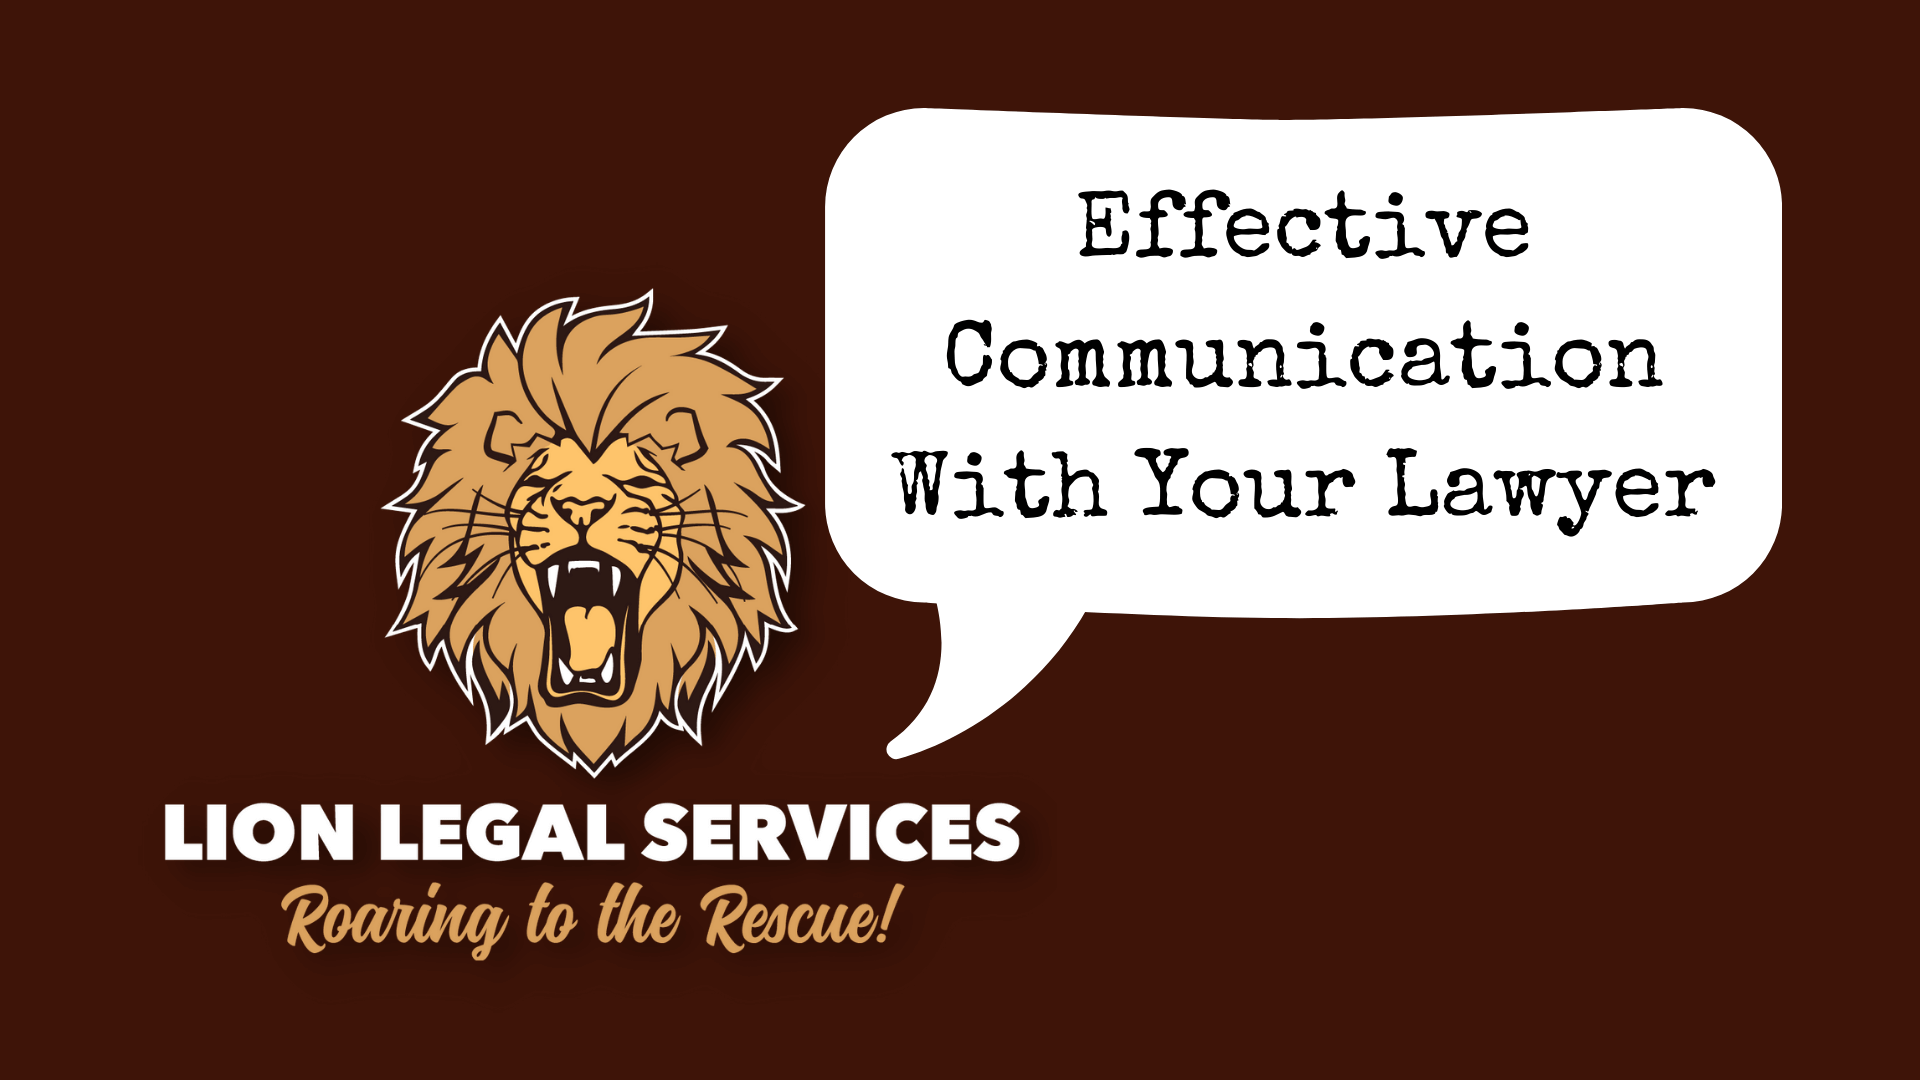 Cover slide reads Effective communication with your lawyer.